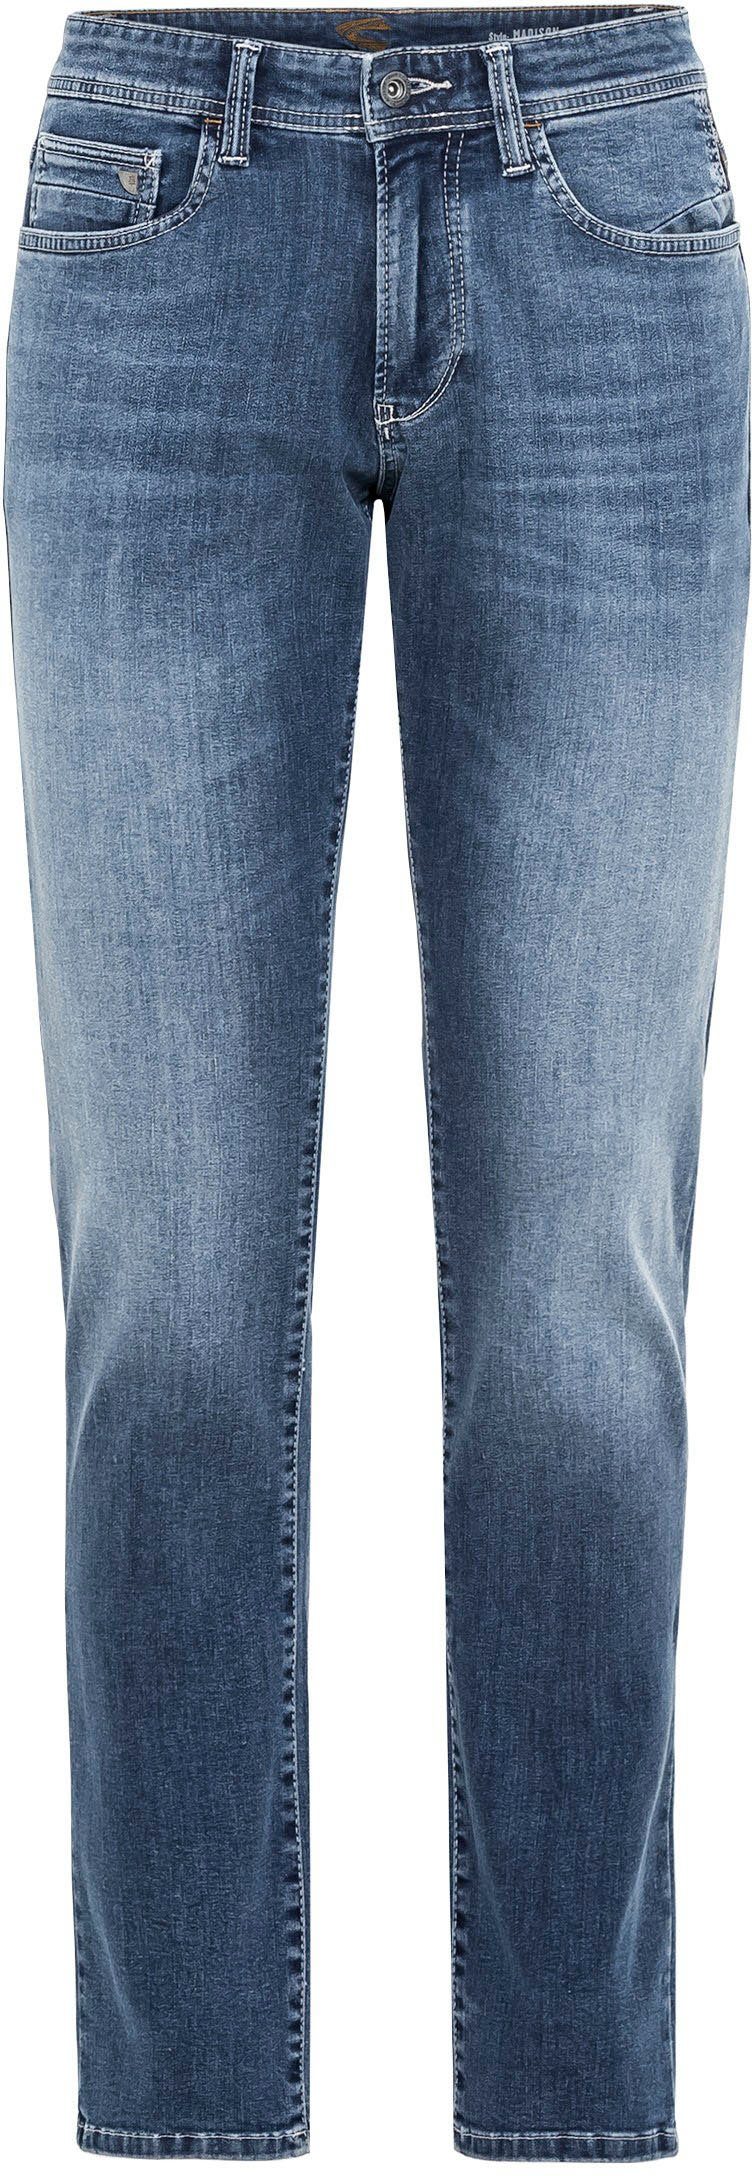 camel active 5-Pocket-Jeans MADISON leichter Used-Look mid blue